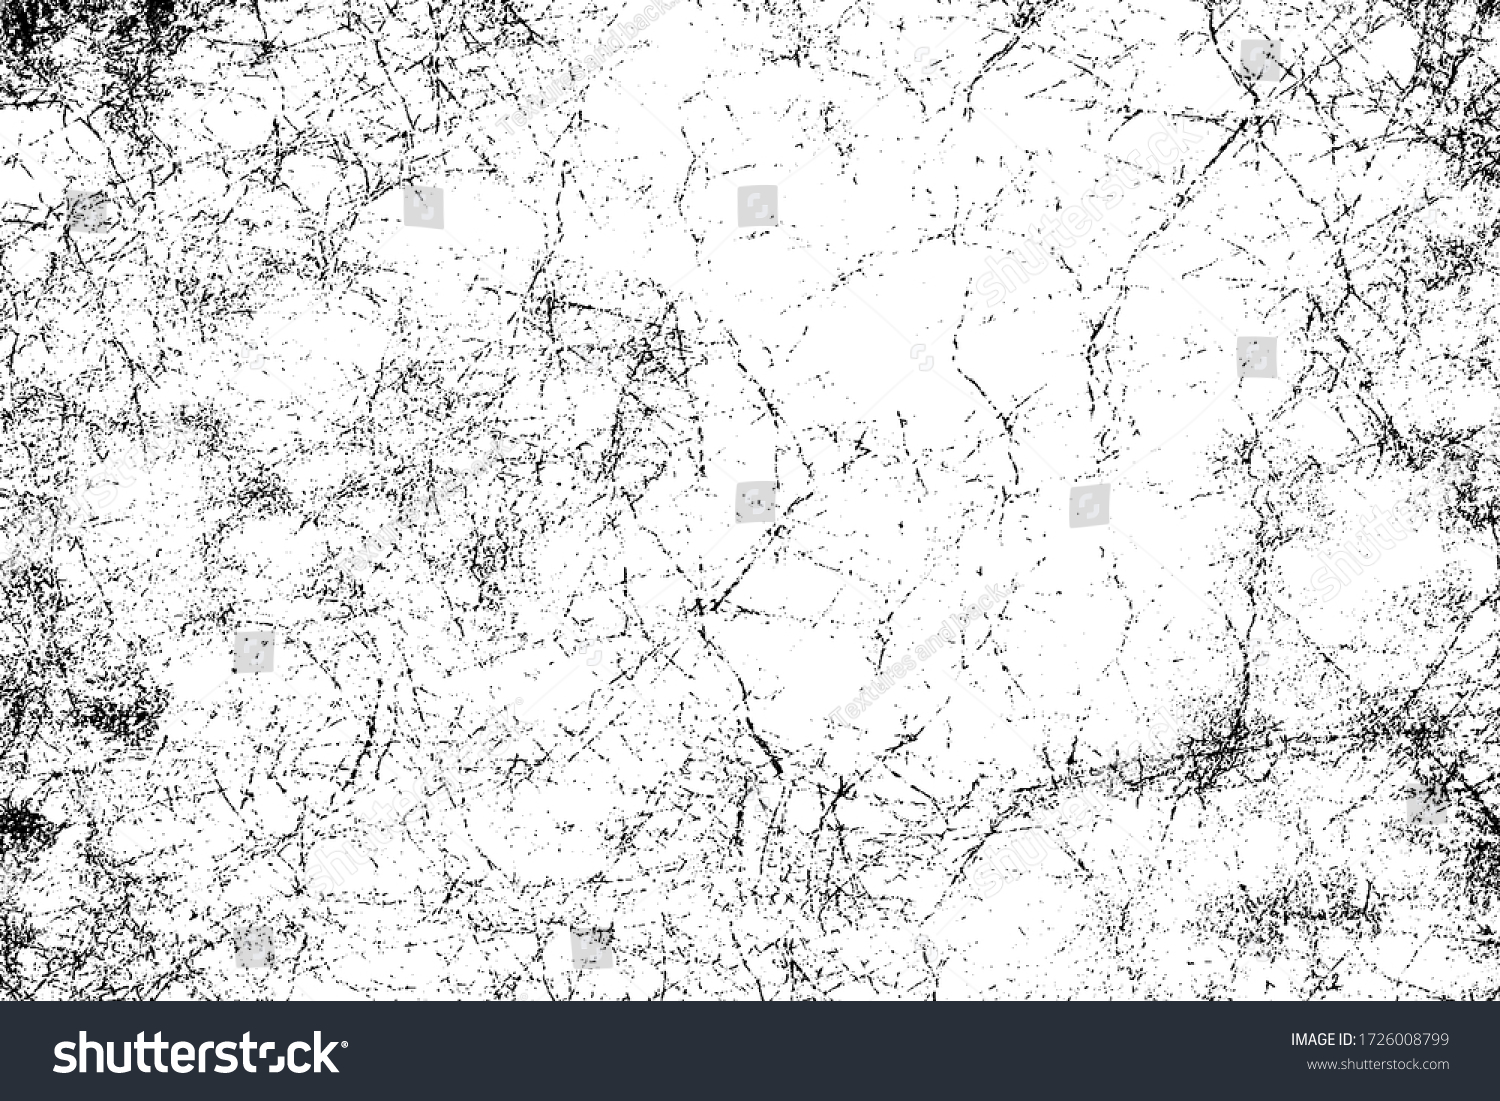 Grunge background black and white. Monochrome texture. Vector pattern of cracks, chips, scuffs. Abstract vintage surface #1726008799